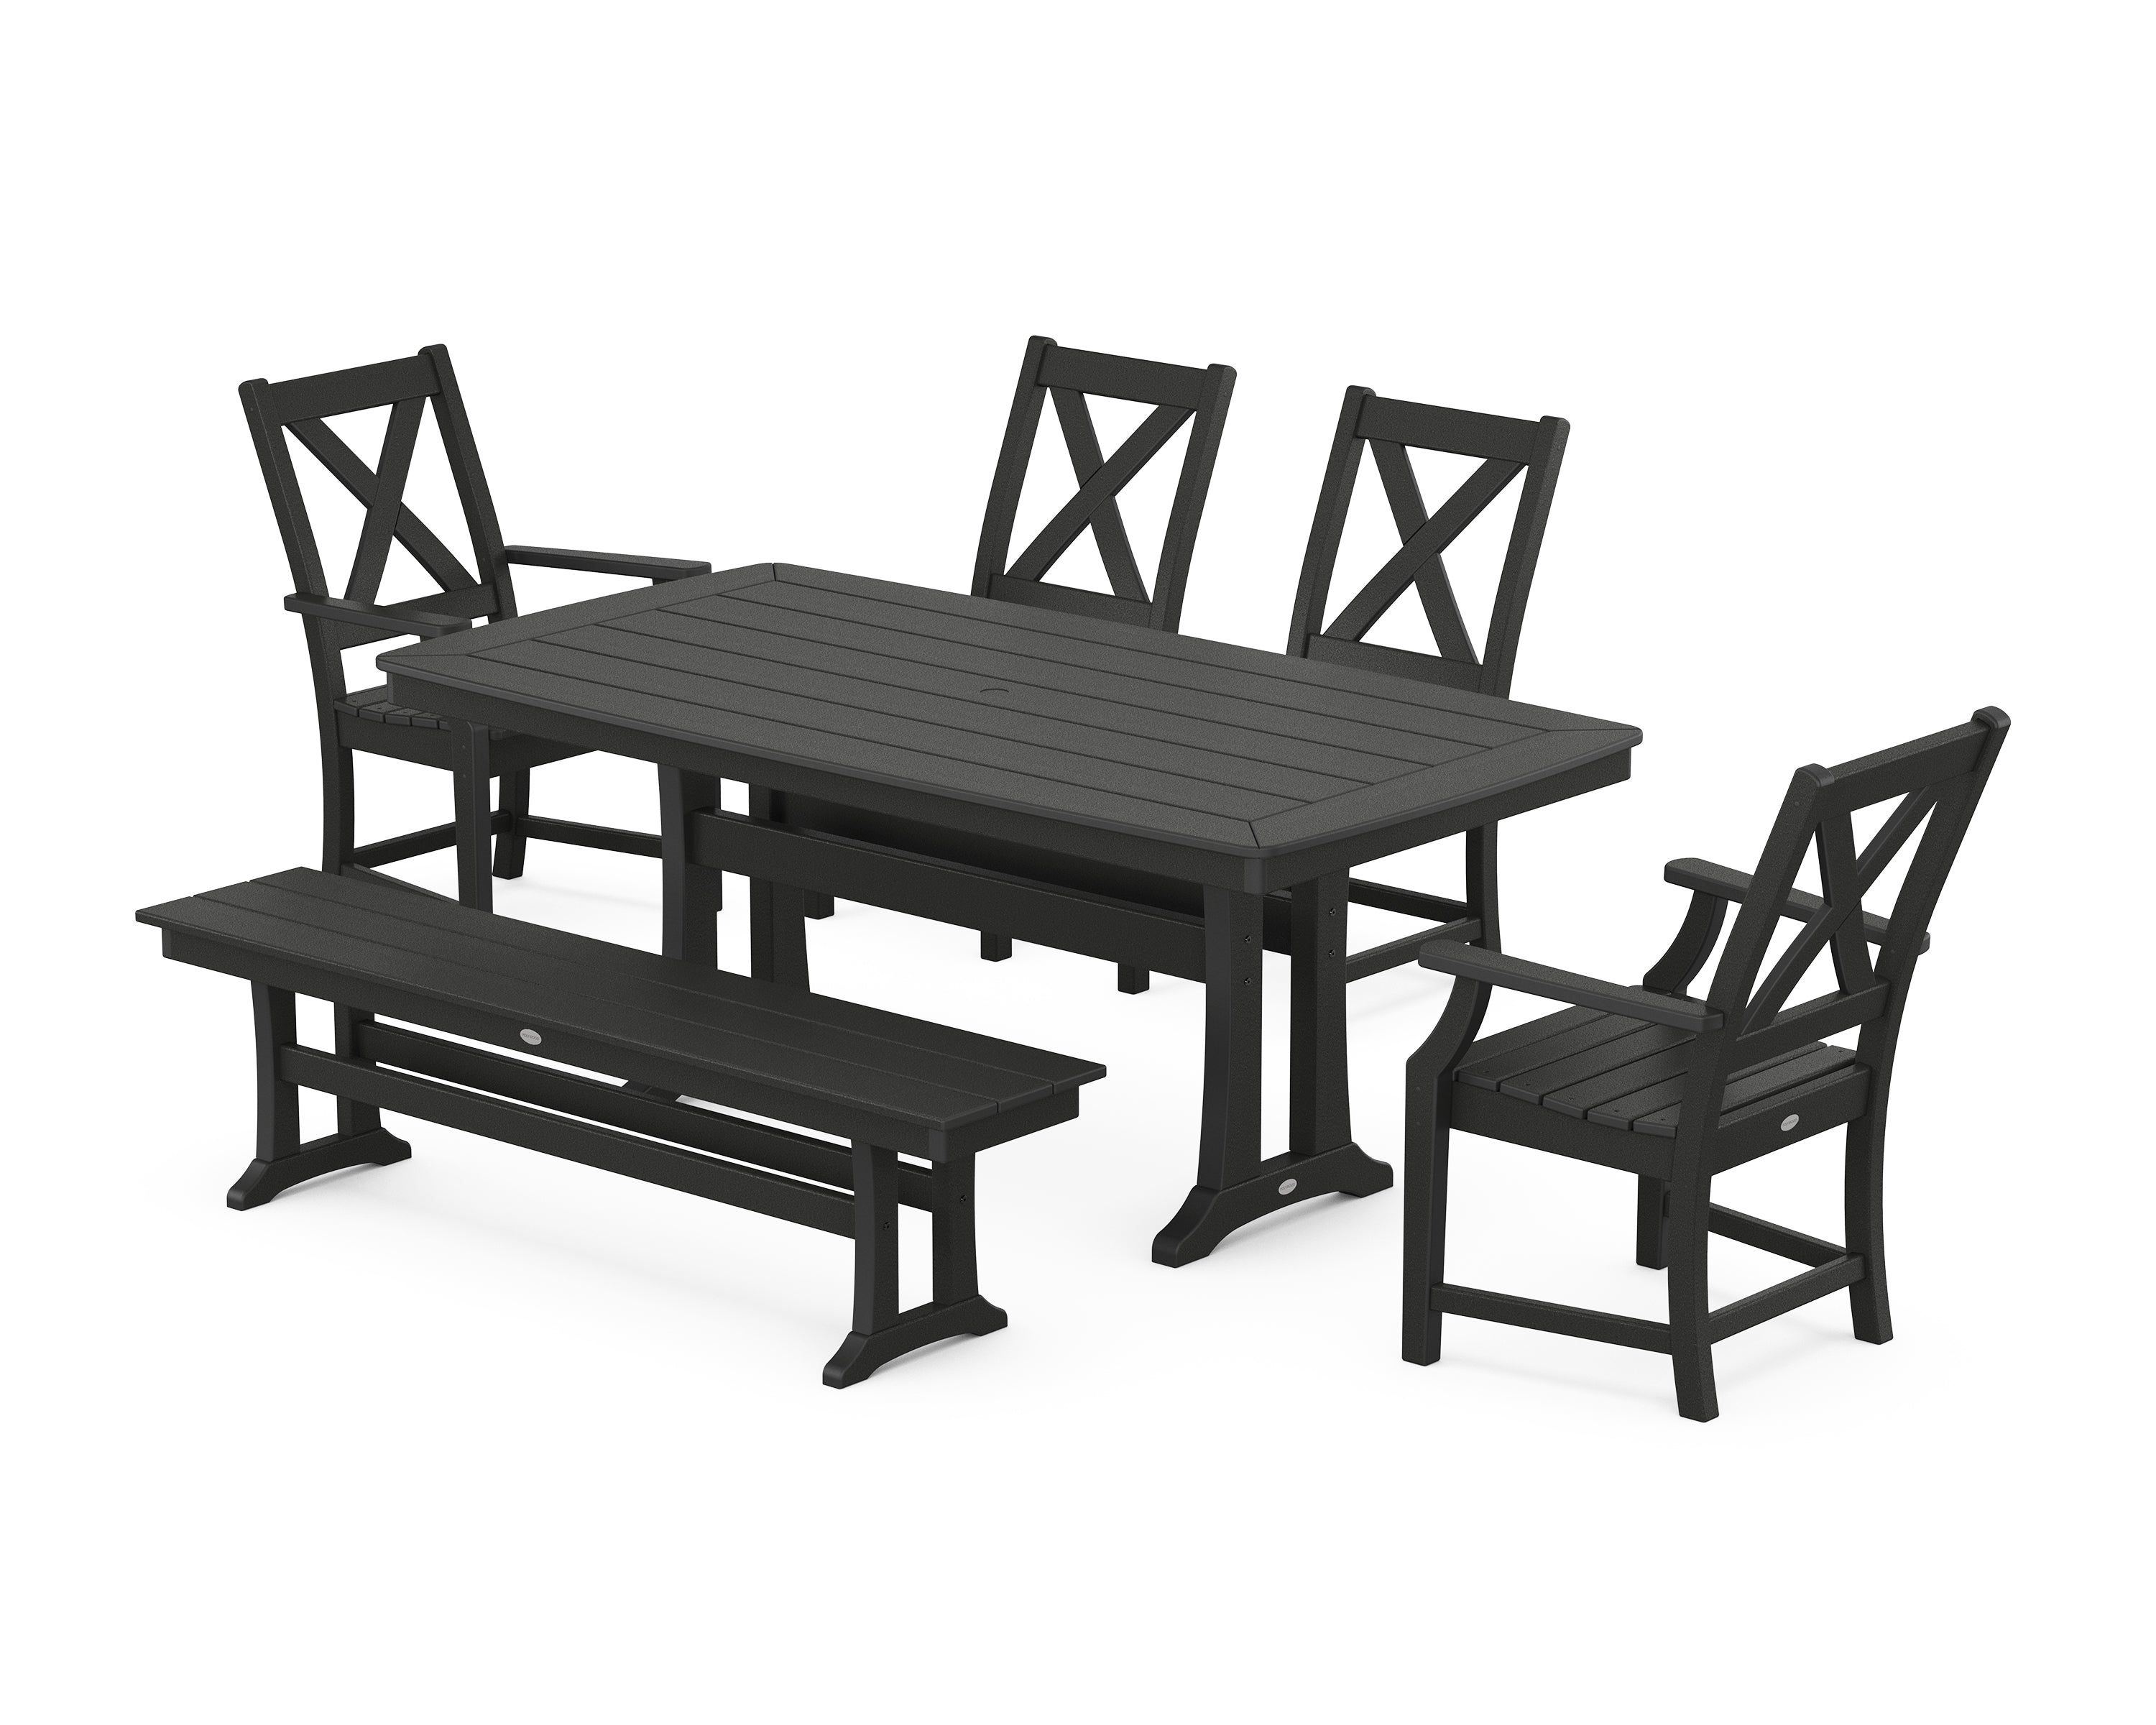 POLYWOOD® Braxton 6-Piece Dining Set with Trestle Legs in Black